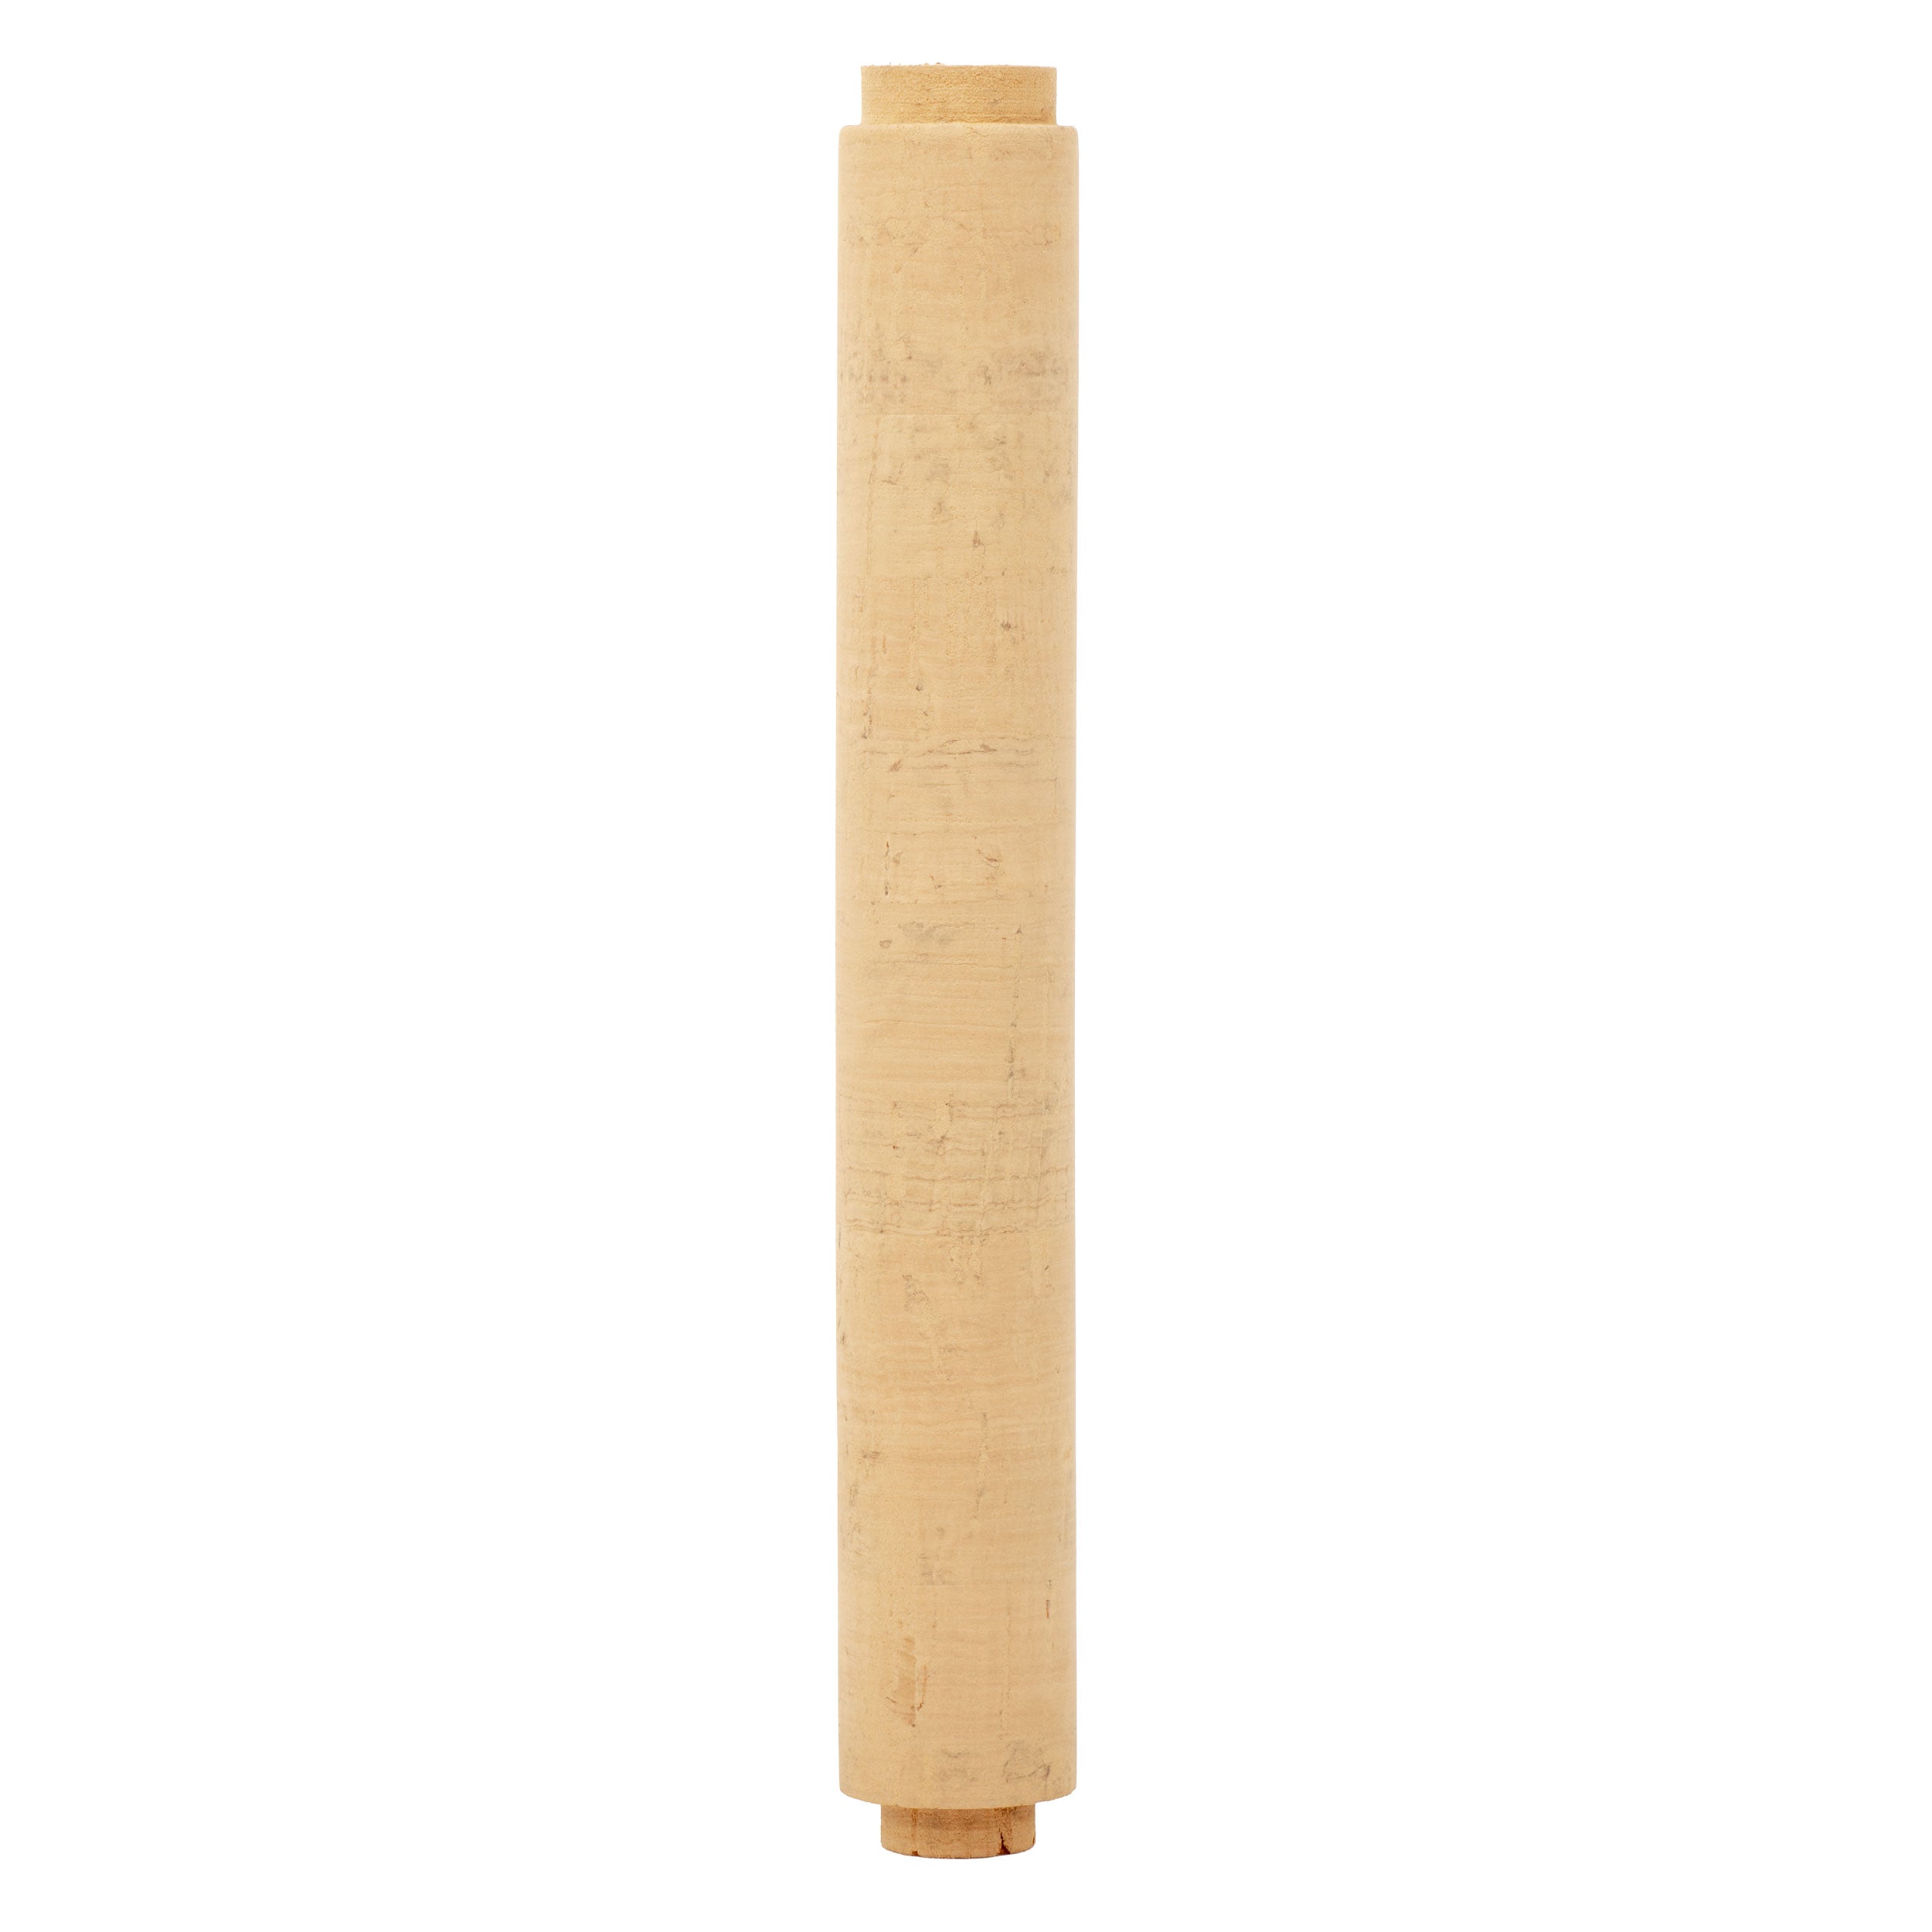 8" Cork Rear Grip for Casting Rods - 0.500" ID